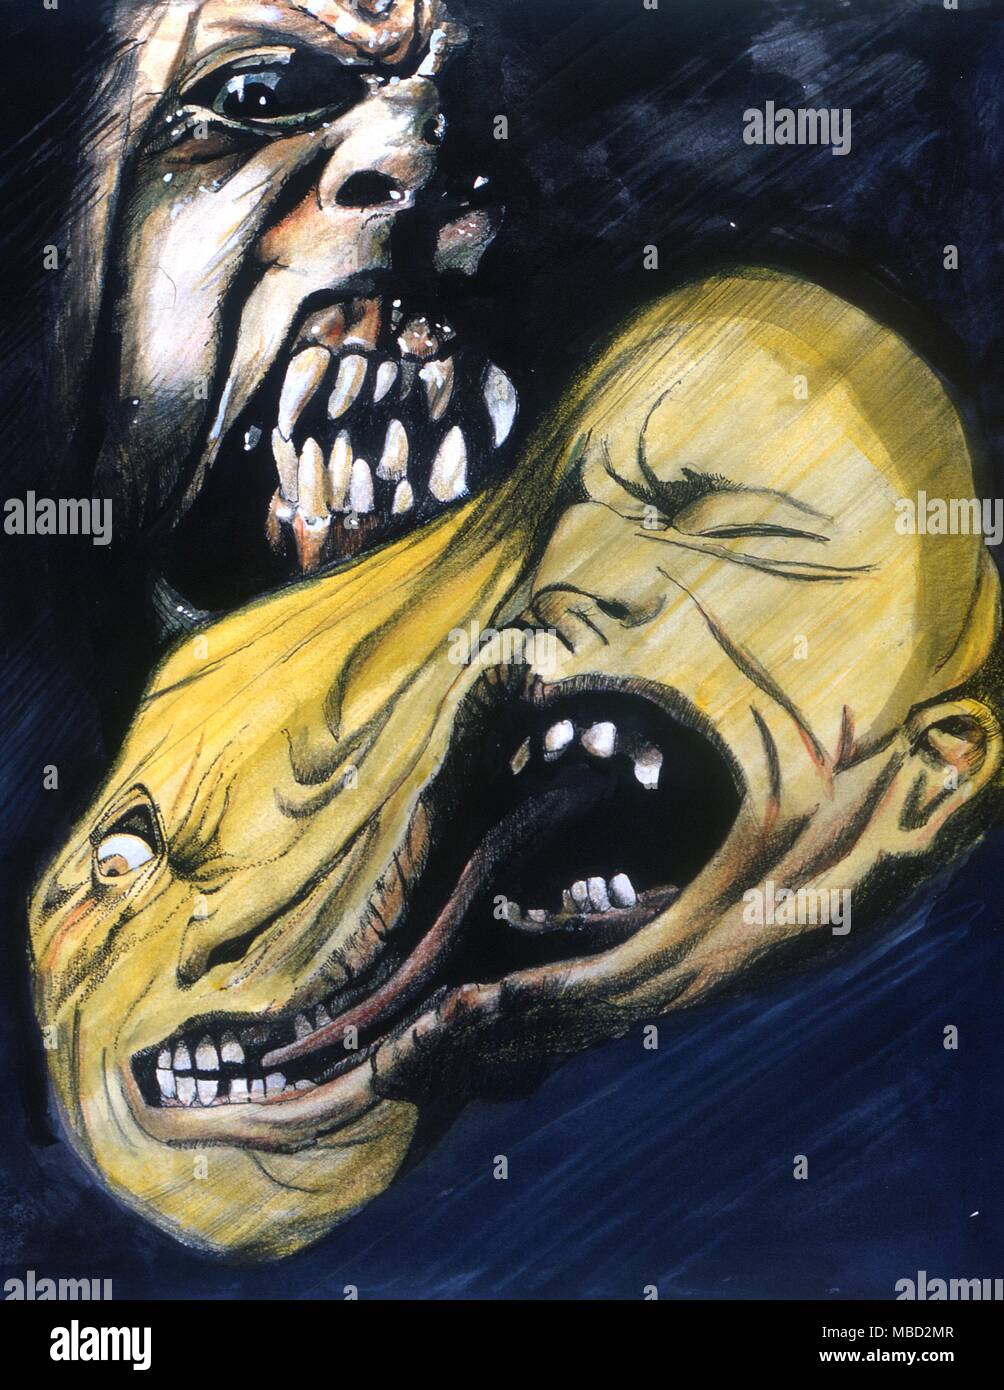 Monsters. Two monstrous heads in a painting 'Sleep no More' by Gordon Wain. 1991 Stock Photo